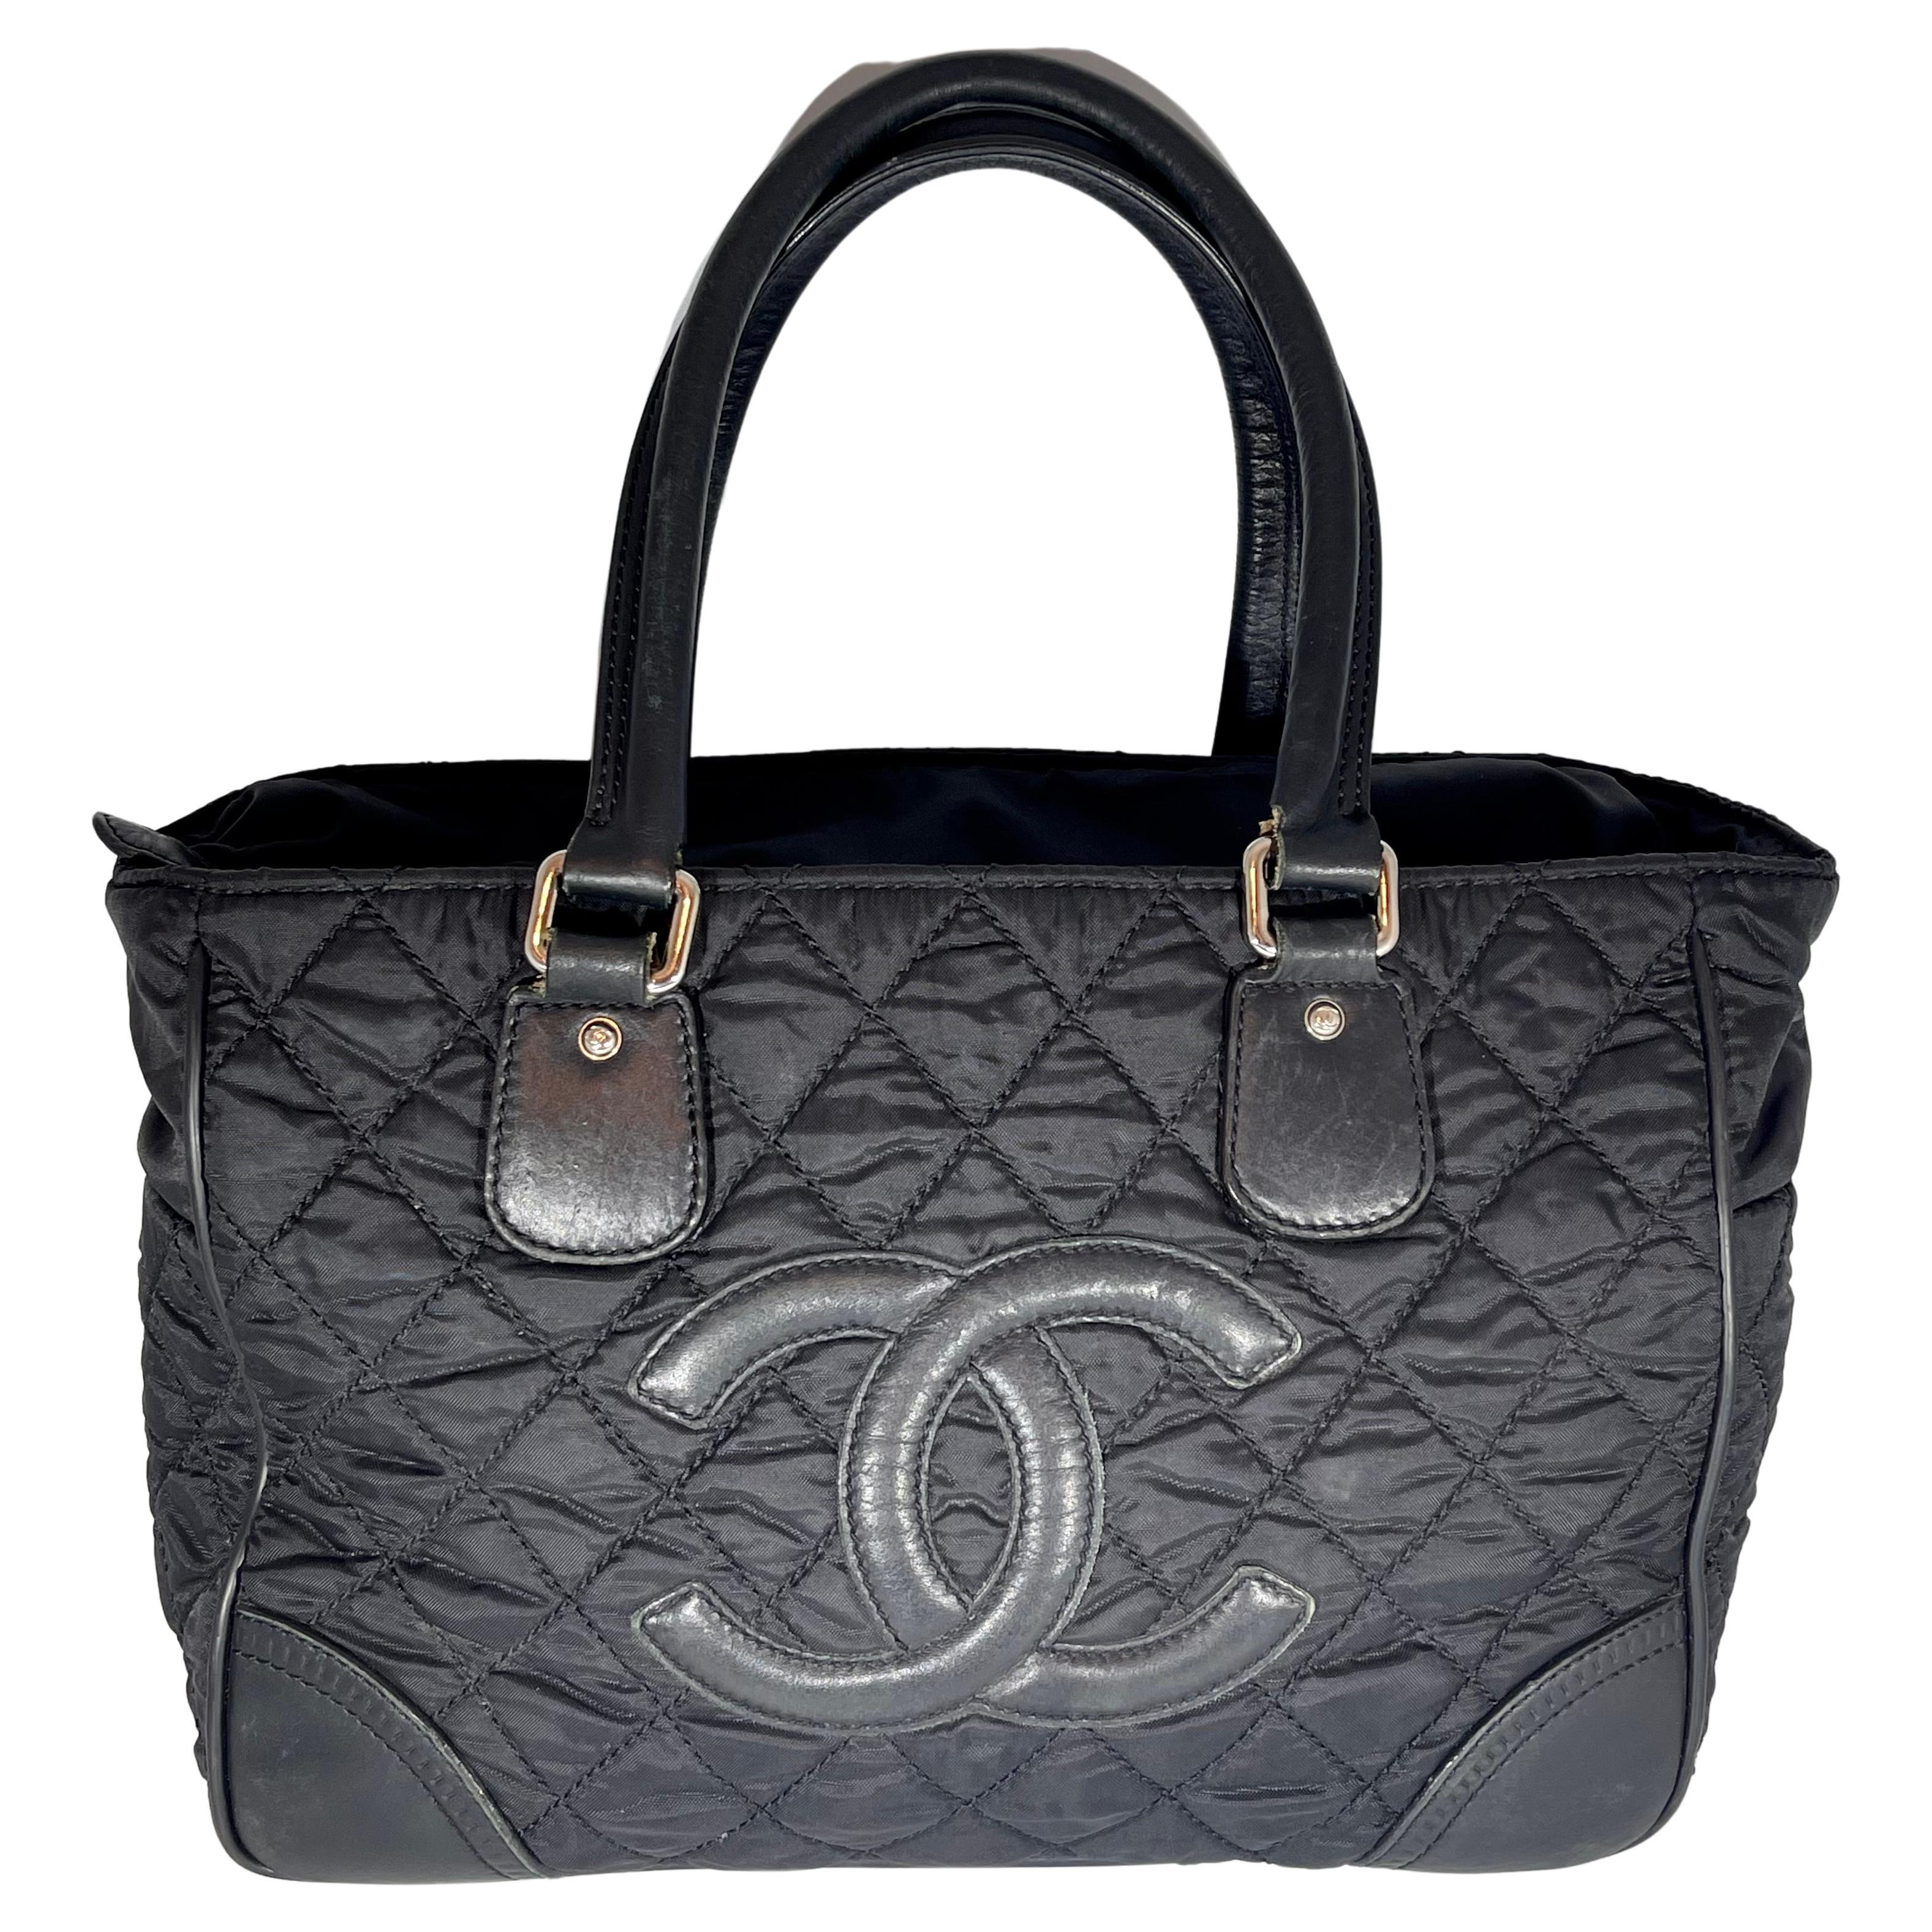 Lot - CHANEL QUILTED NYLON TRAVEL BAG